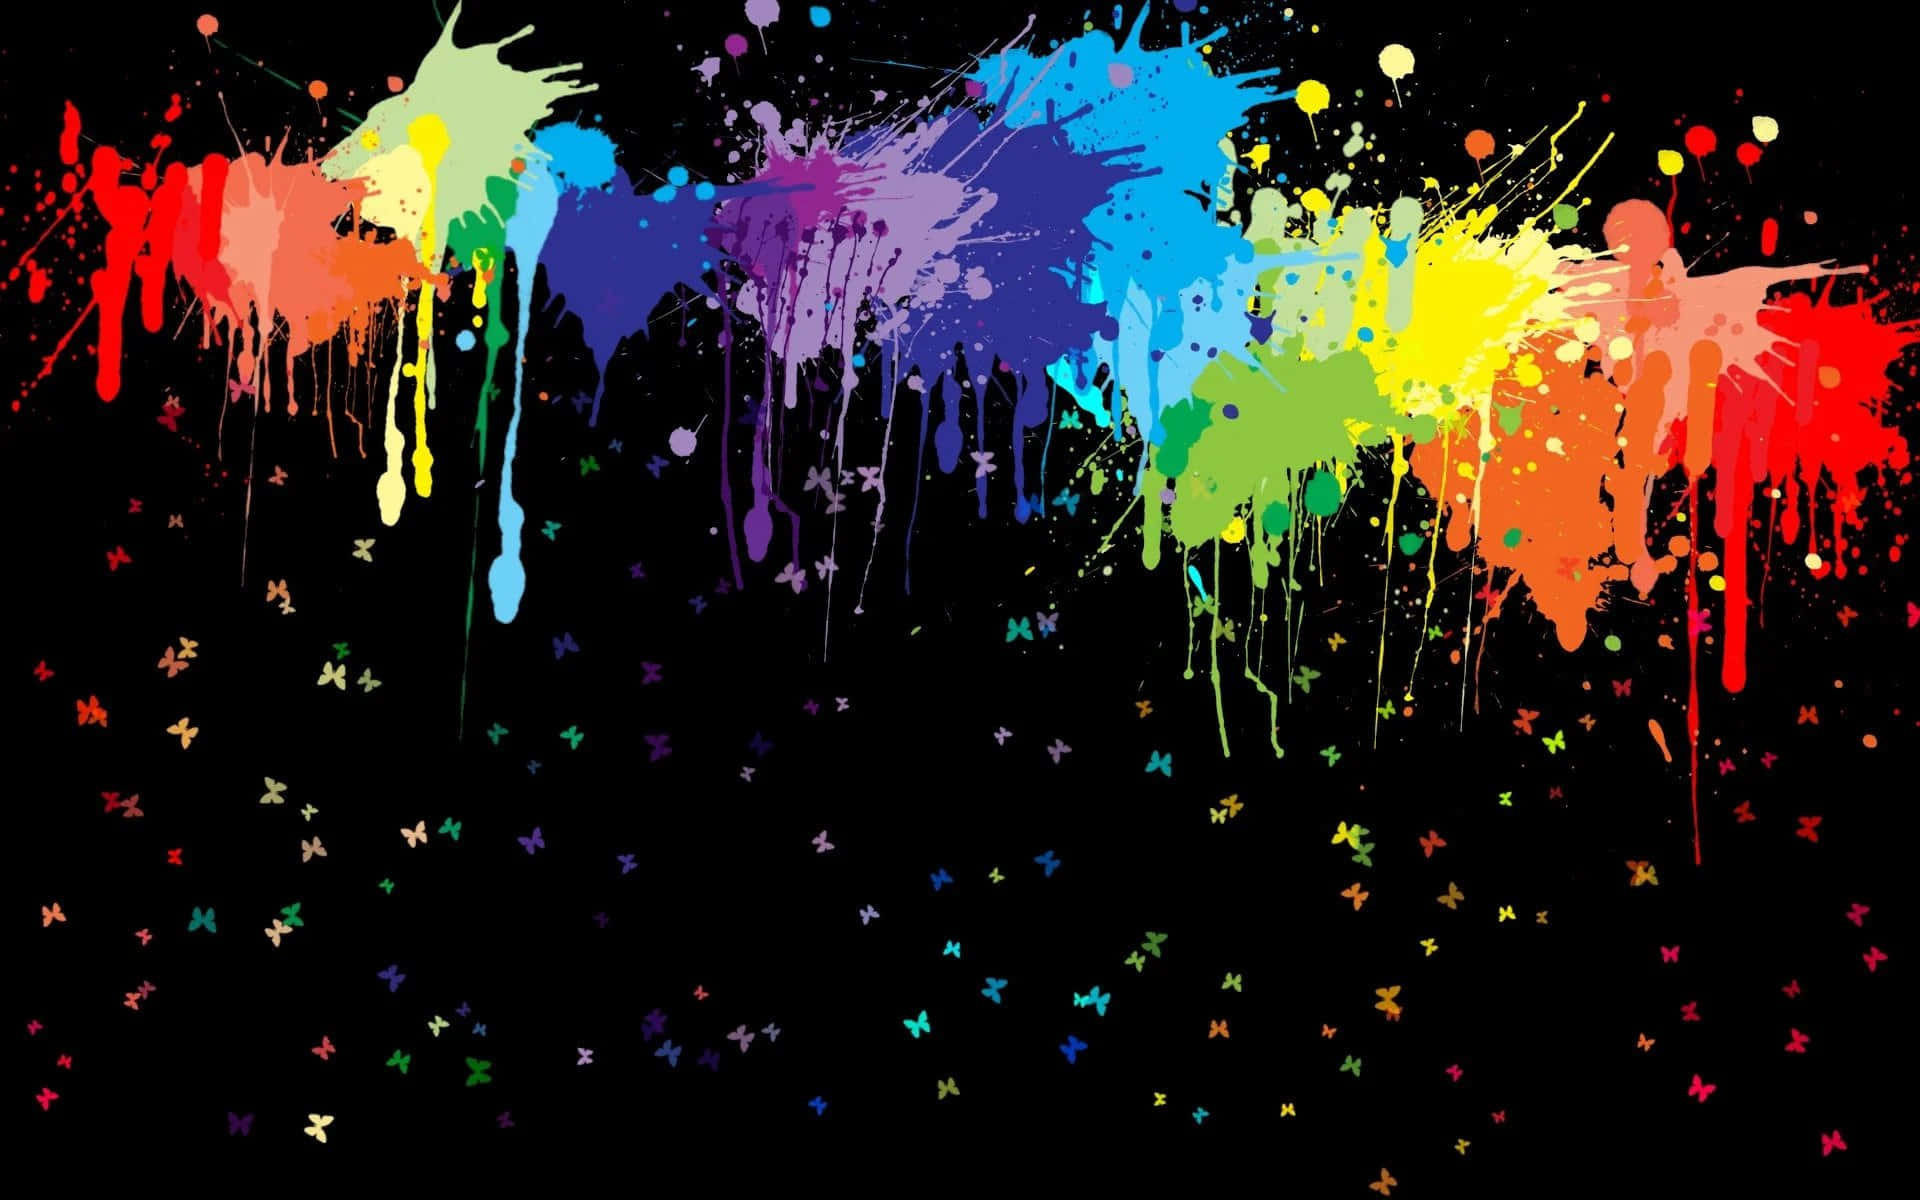 An abstract multicolored splash of paint on a black background